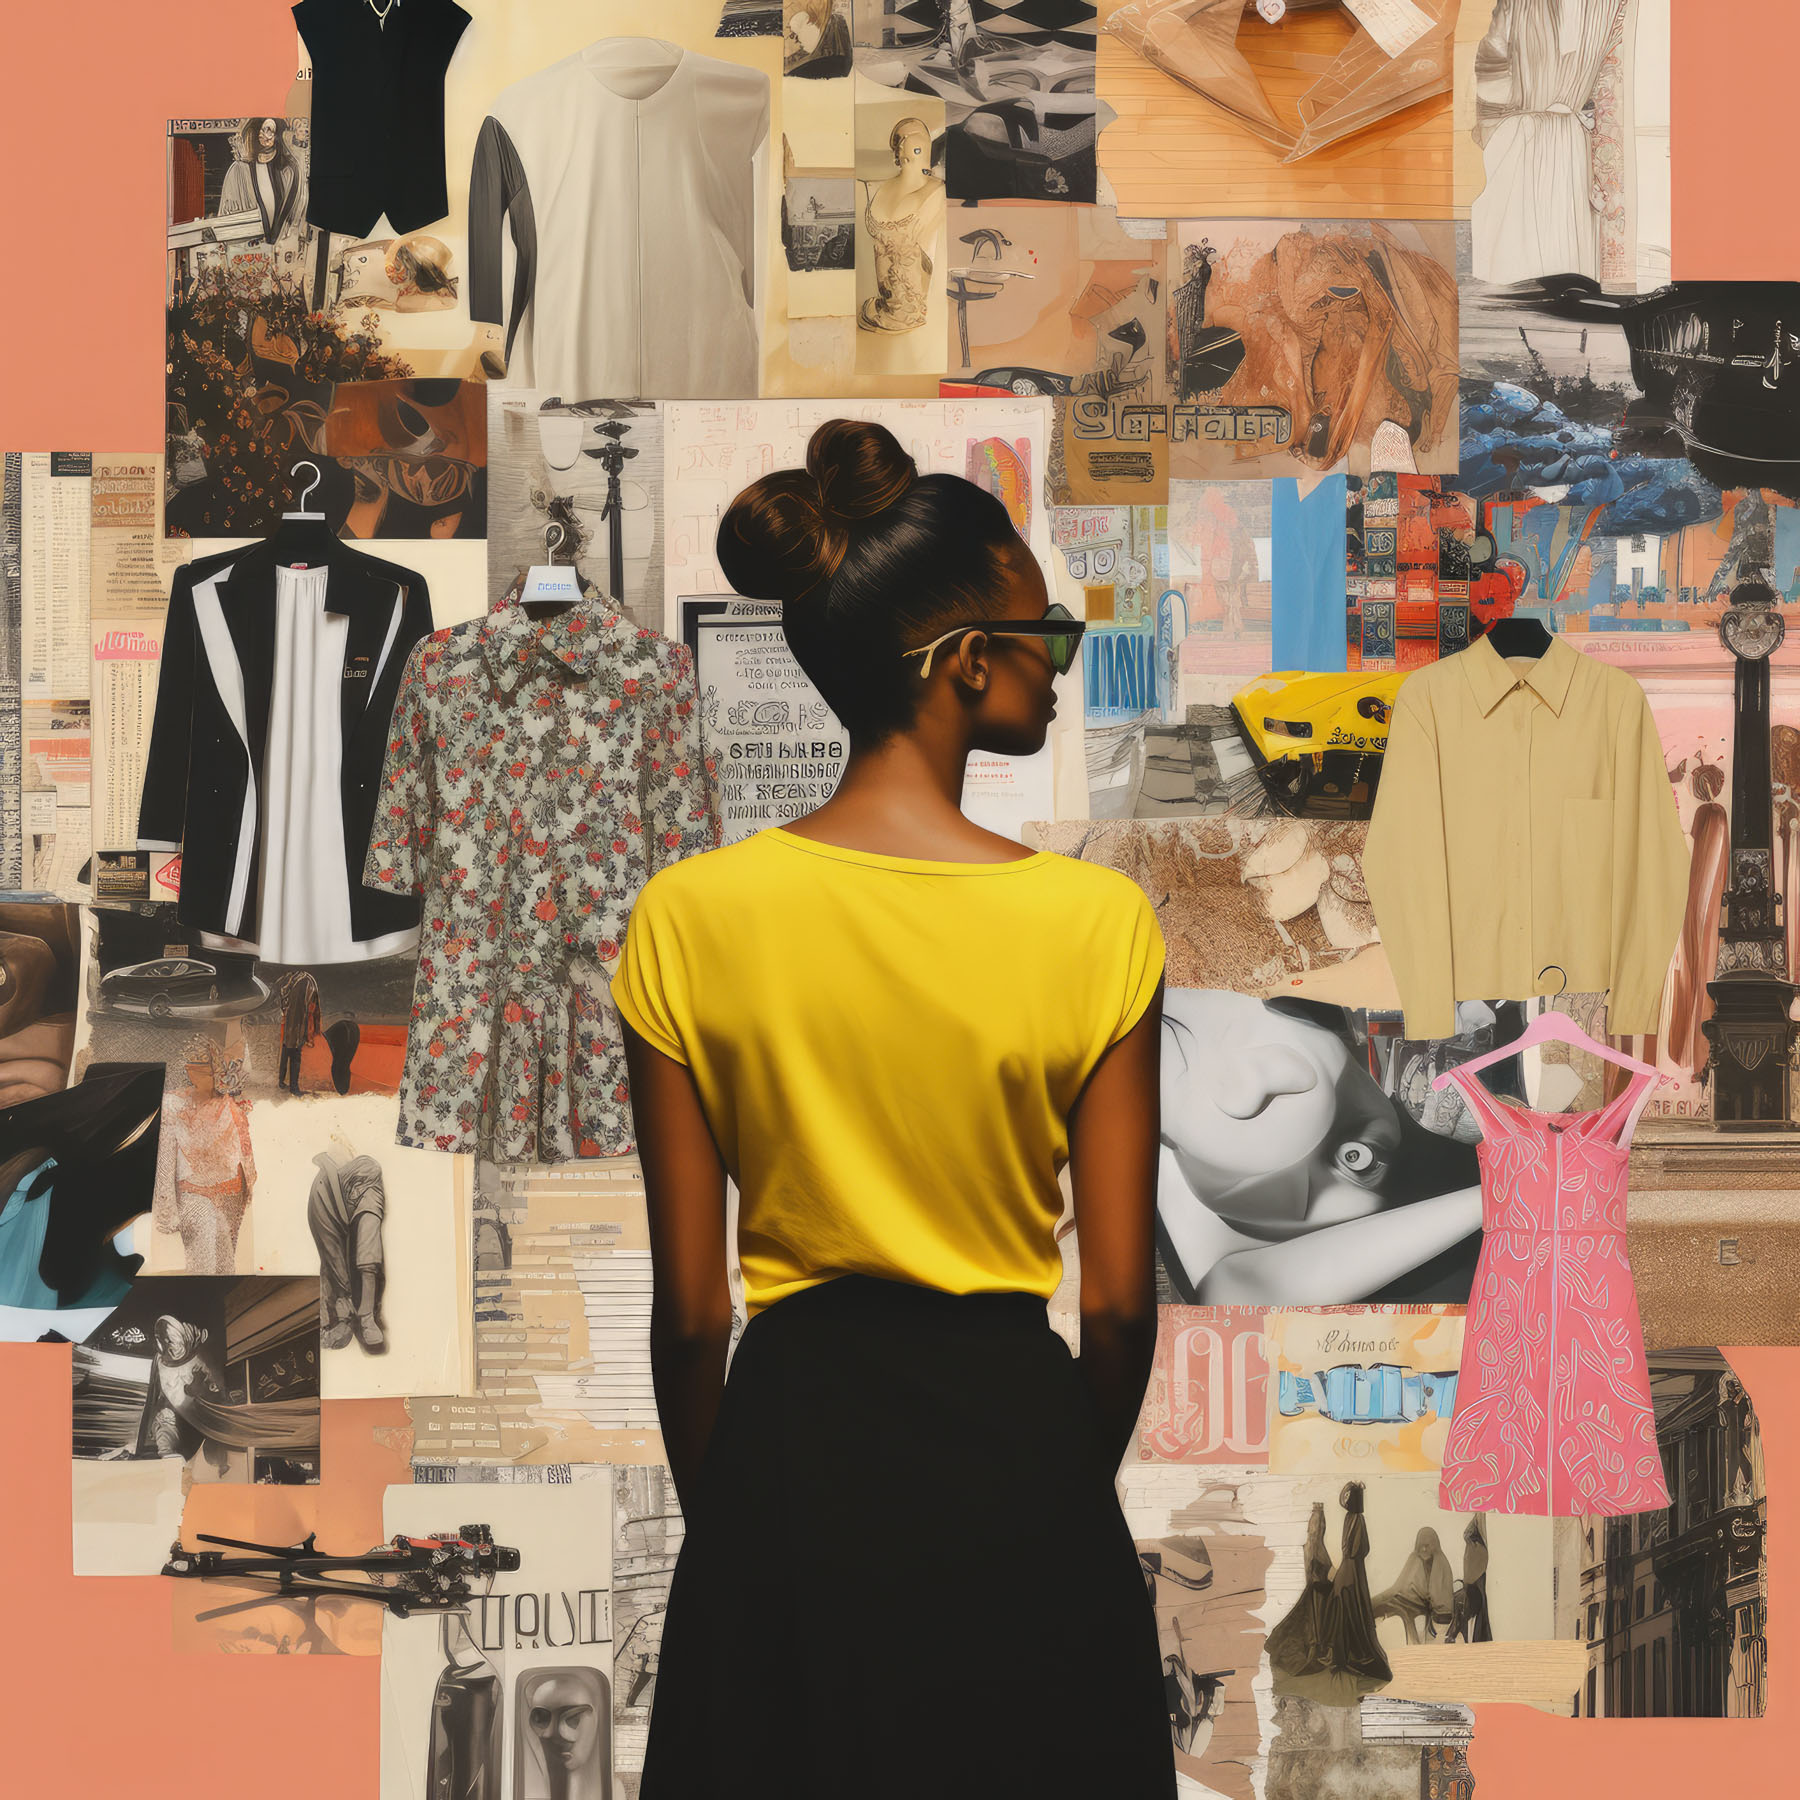 Young woman, wearing a bright yellow top, looks at wall of fashion forward clothes and collages.